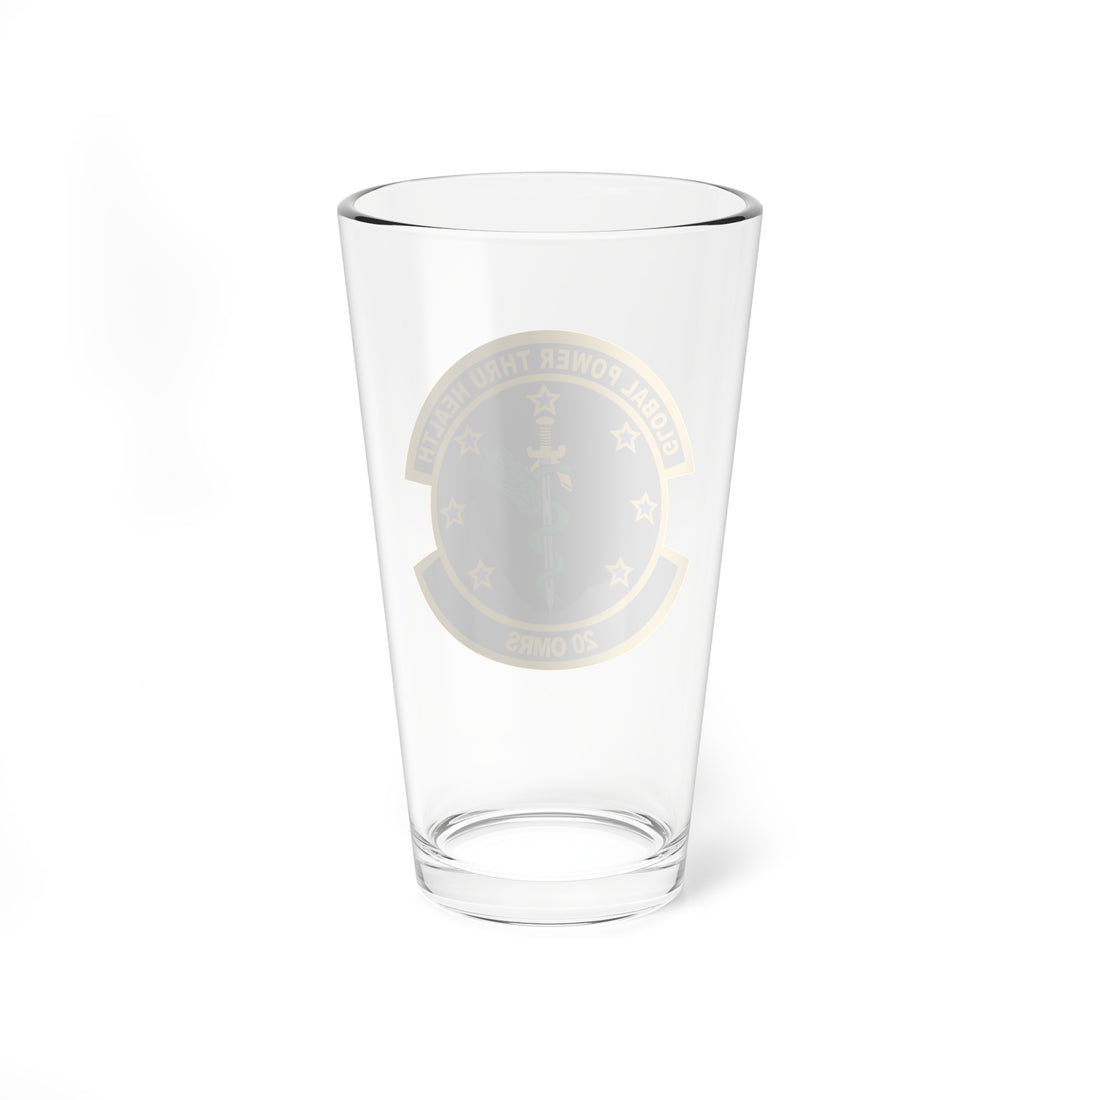 20th OMRS Pint Glass, USAF Operational Medical Readiness Squadron